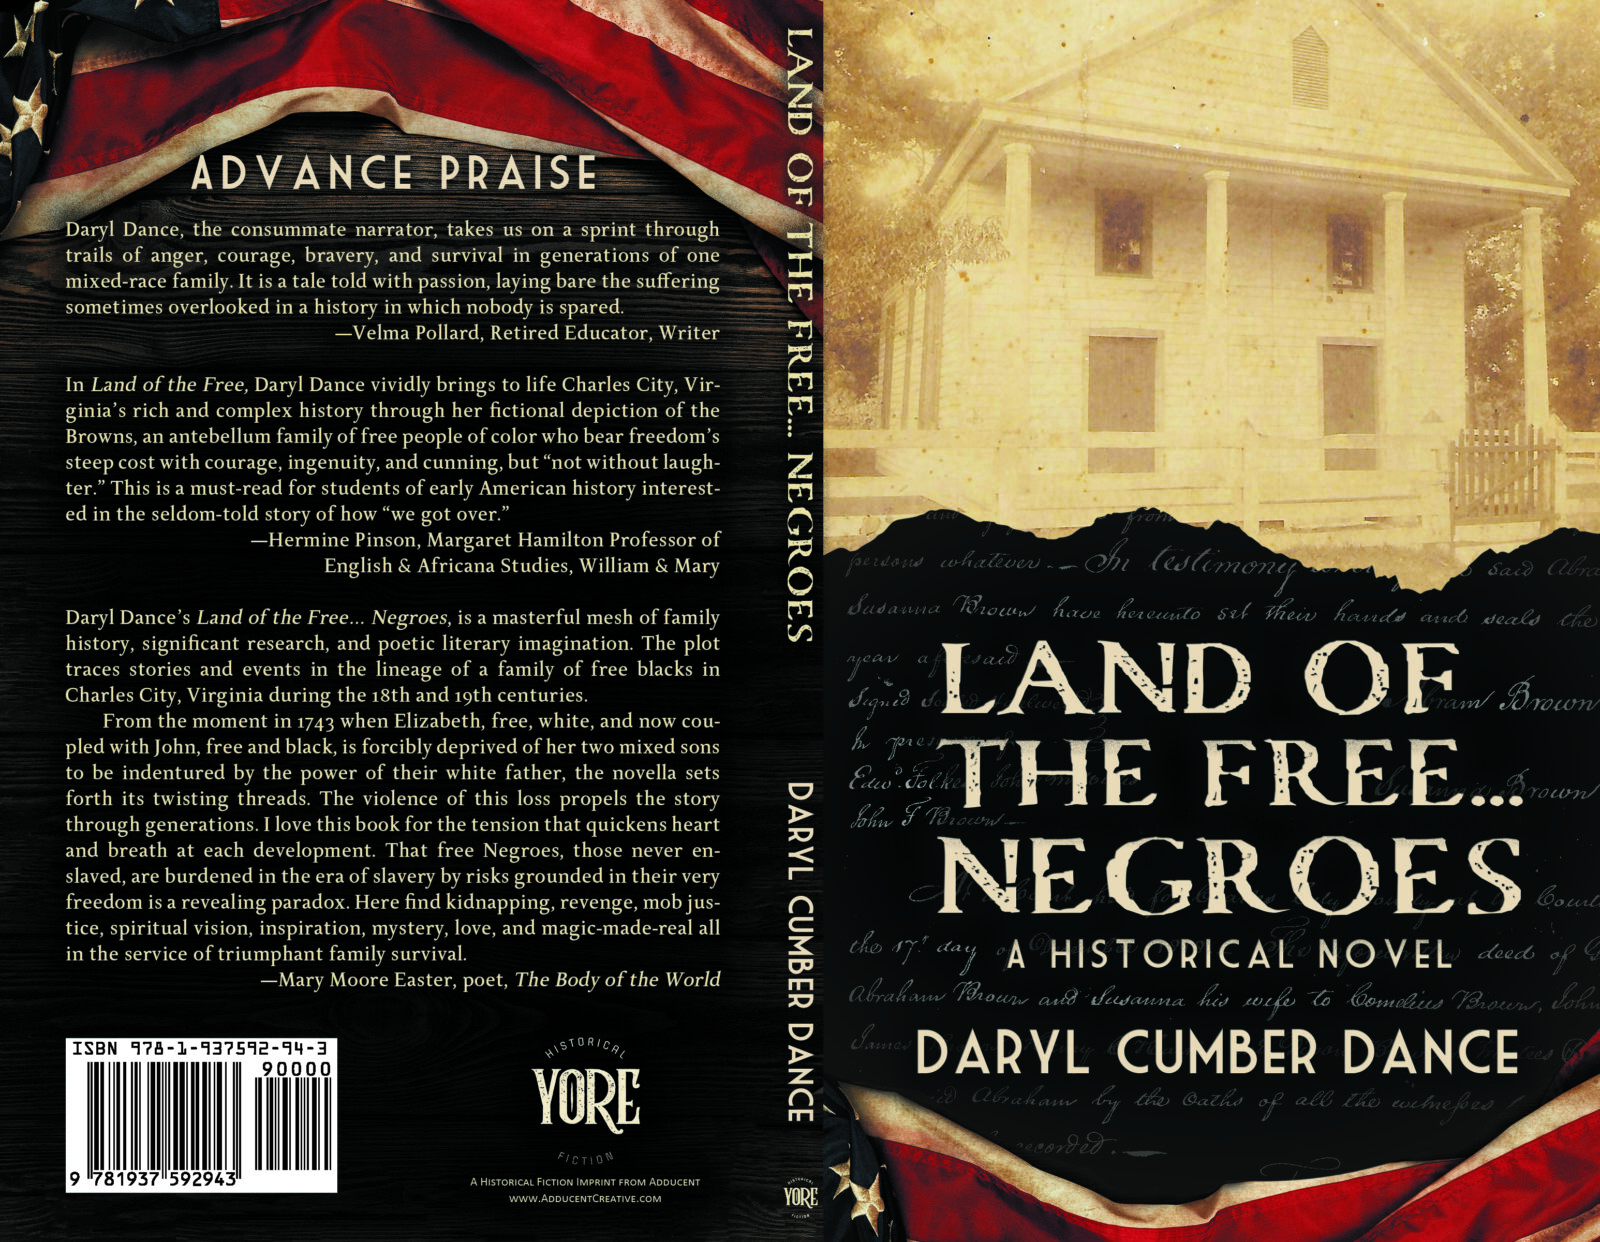 Land of the Free... Negroes